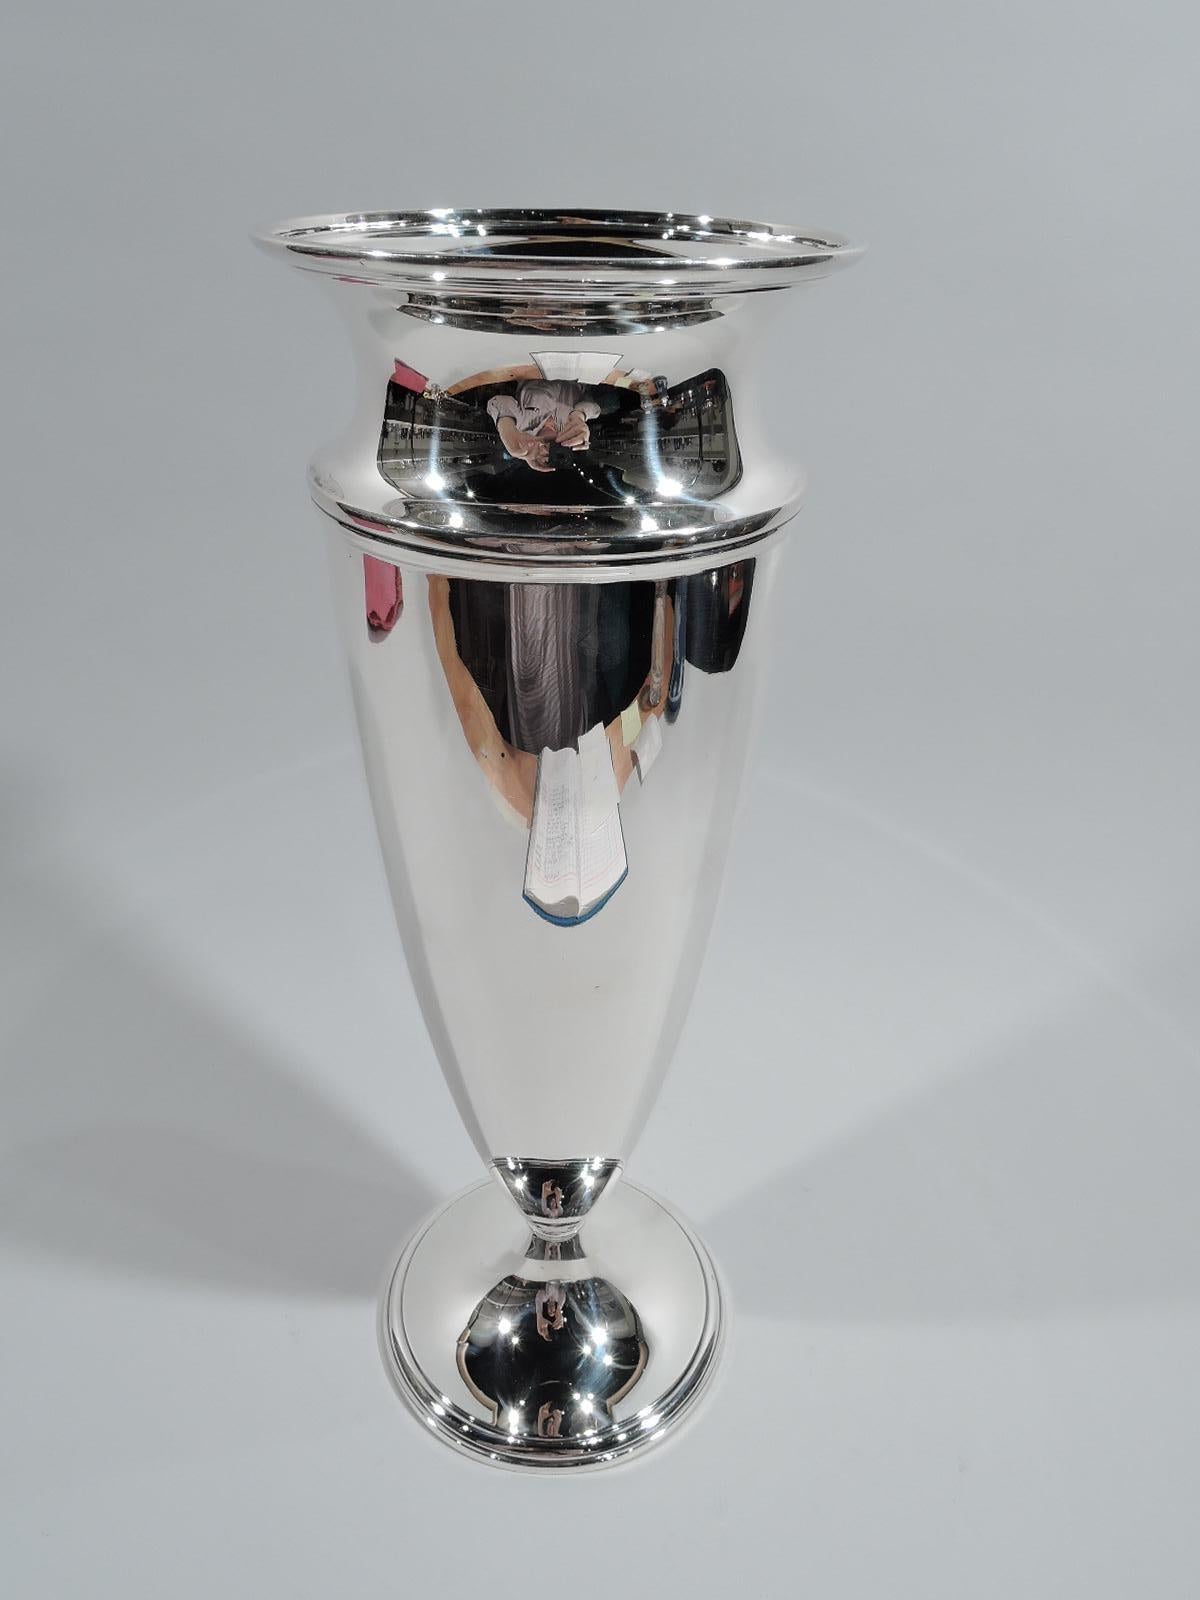 Super stylish Art Deco sterling silver vase. Made by Tiffany & Co. in New York, ca 1925. Tall conical body with spool neck and flared mouth. Foot raised and stepped. Fully marked including pattern no. 20496 (first produced in 1925) and director’s